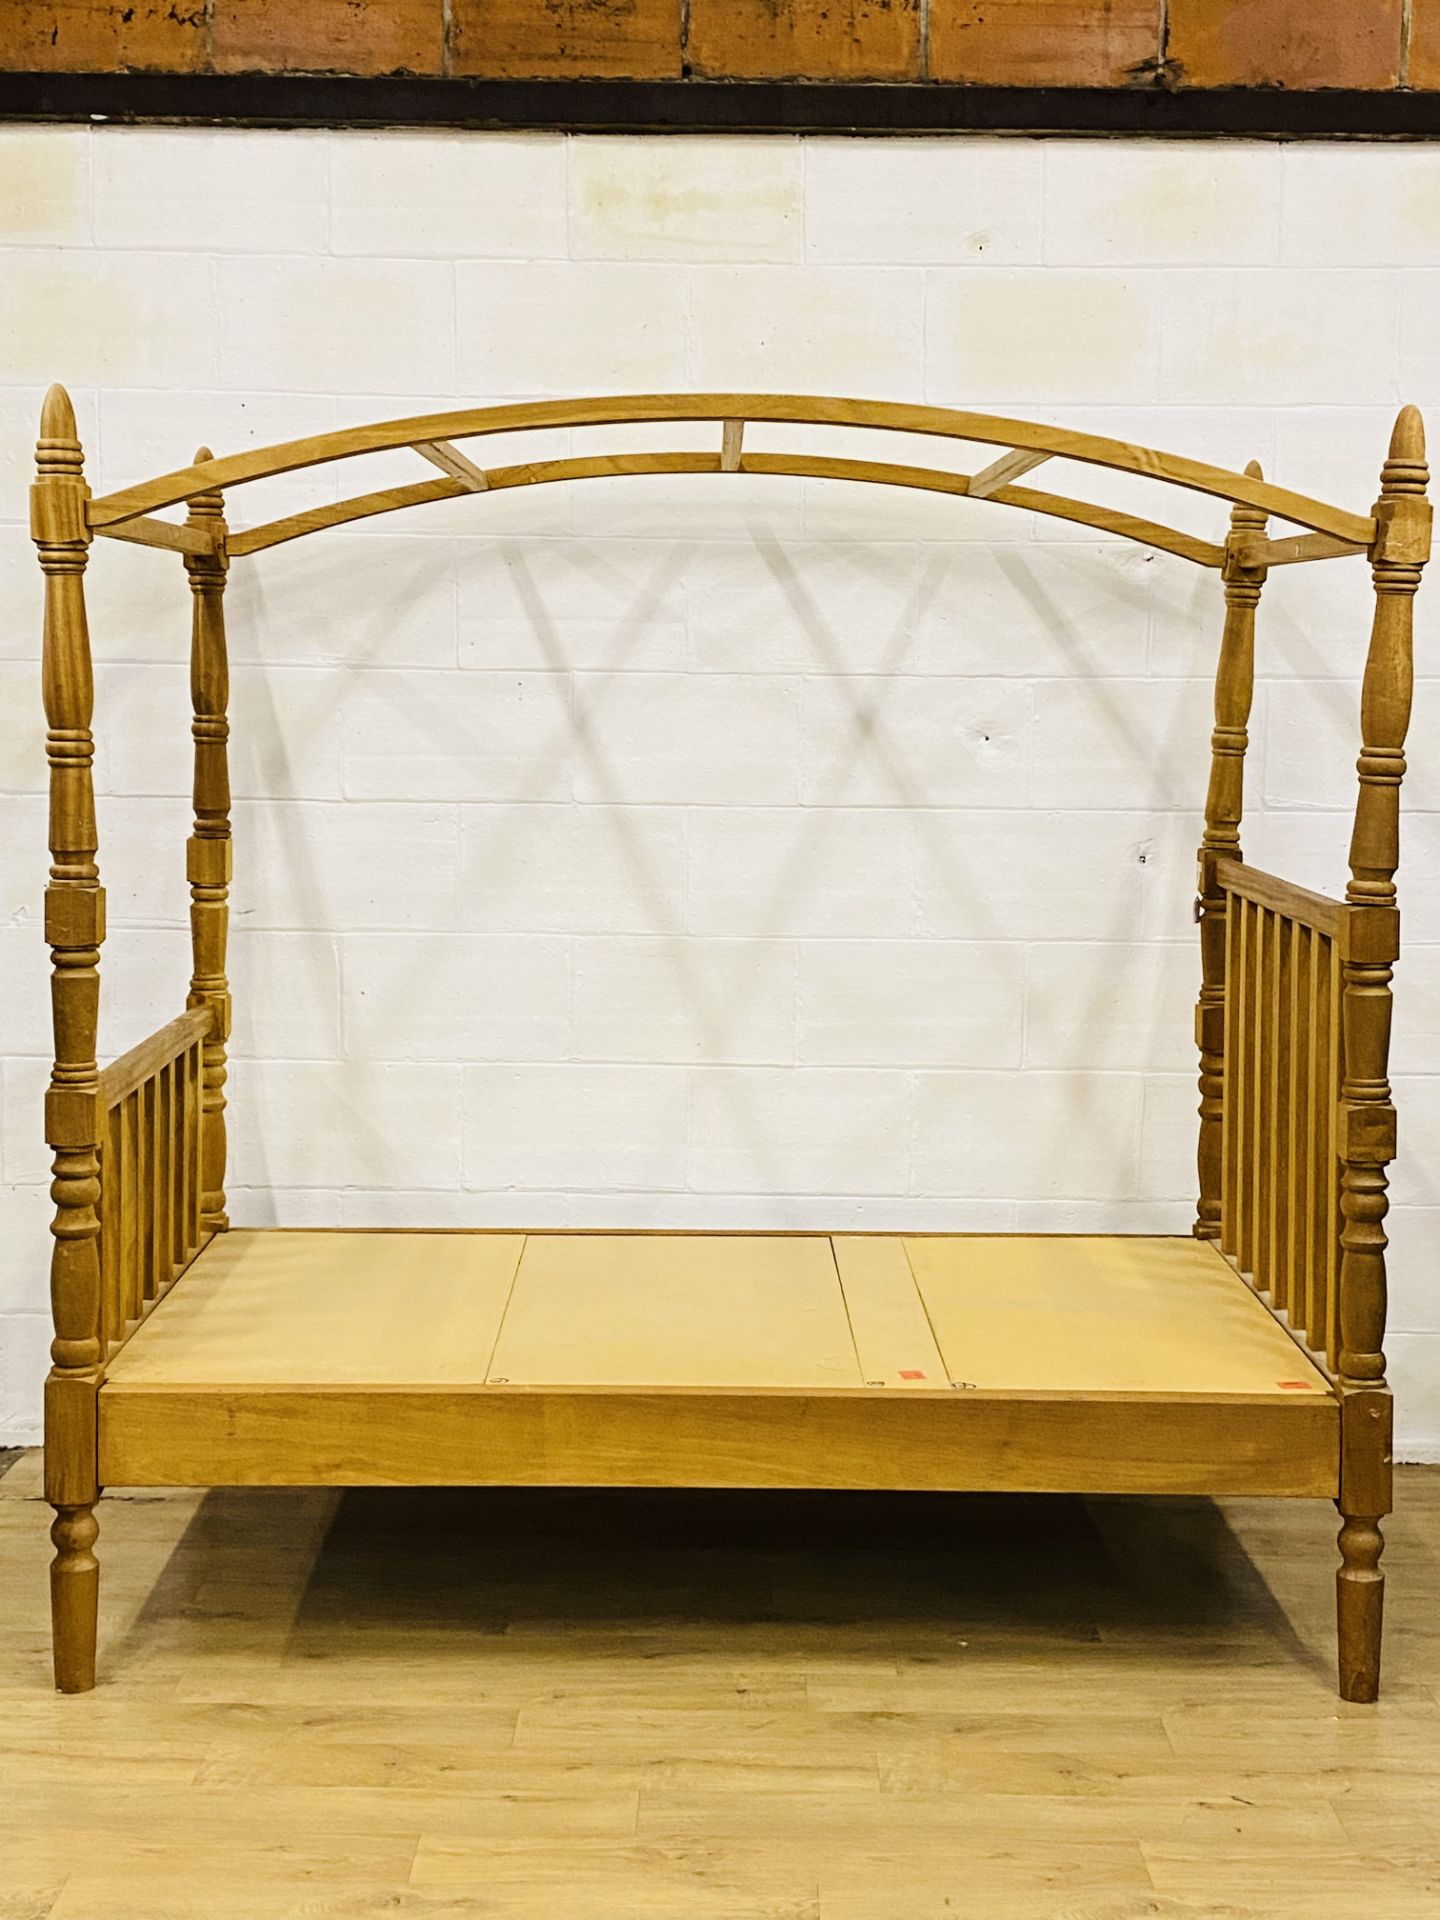 Teak four poster bed - Image 2 of 6